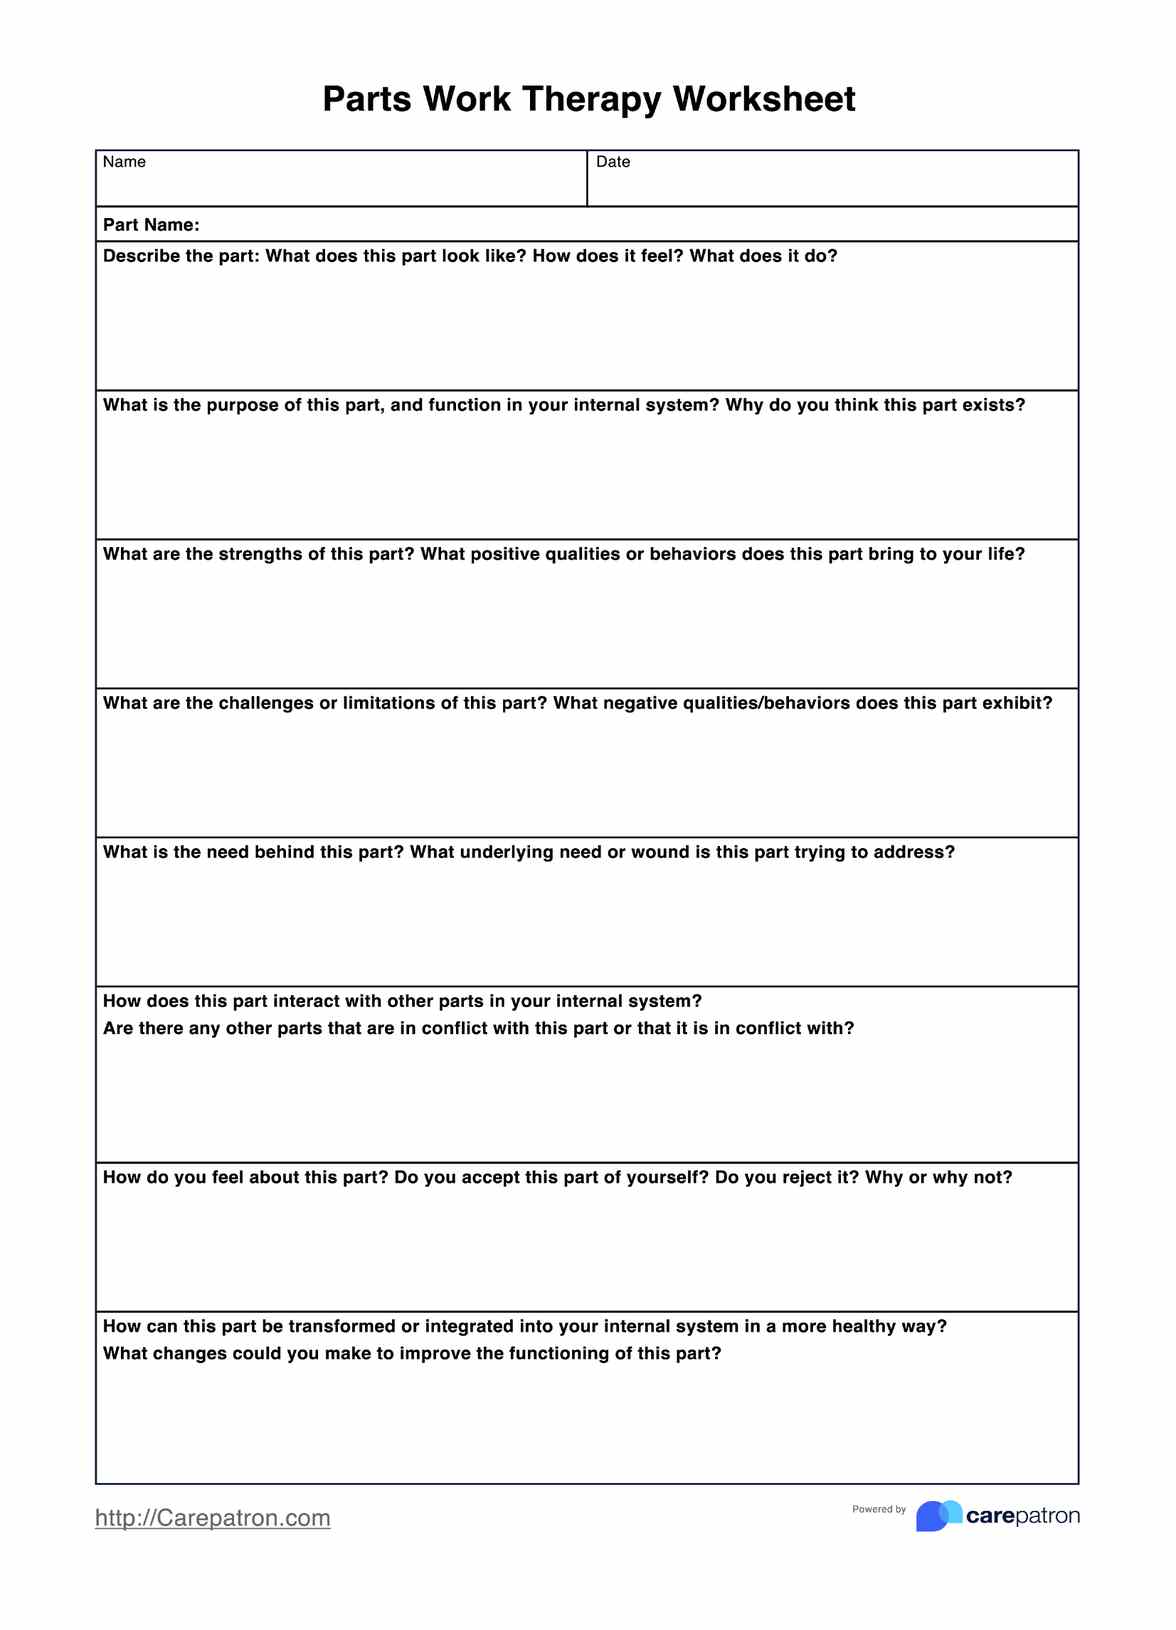 Parts Work Therapy Worksheets PDF Example